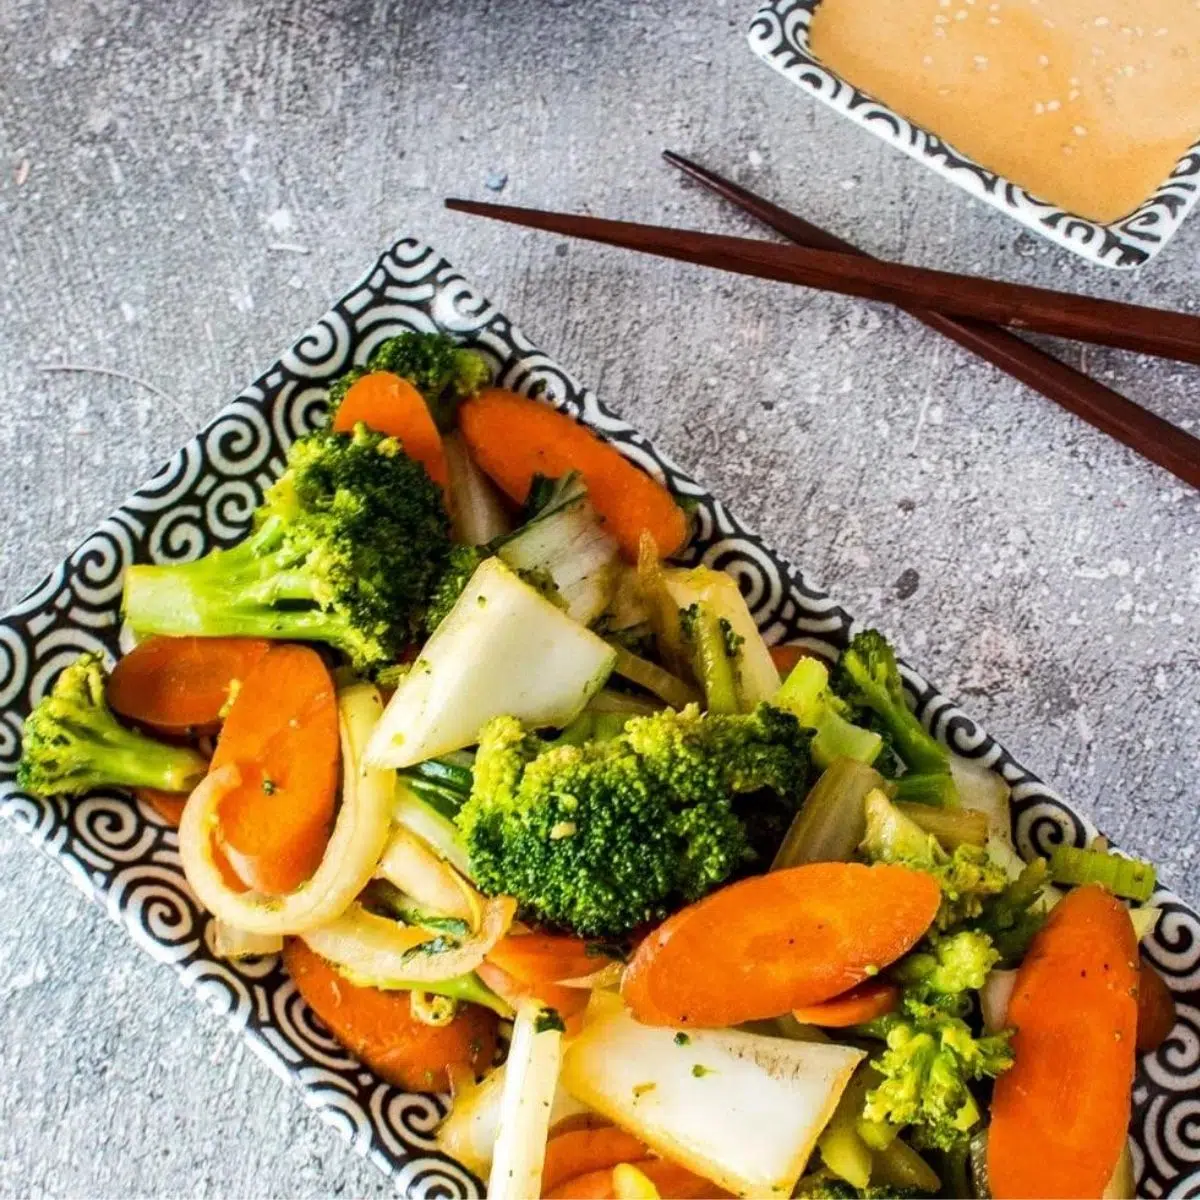 Square image of hibachi vegetables on a grey background with chopsticks.